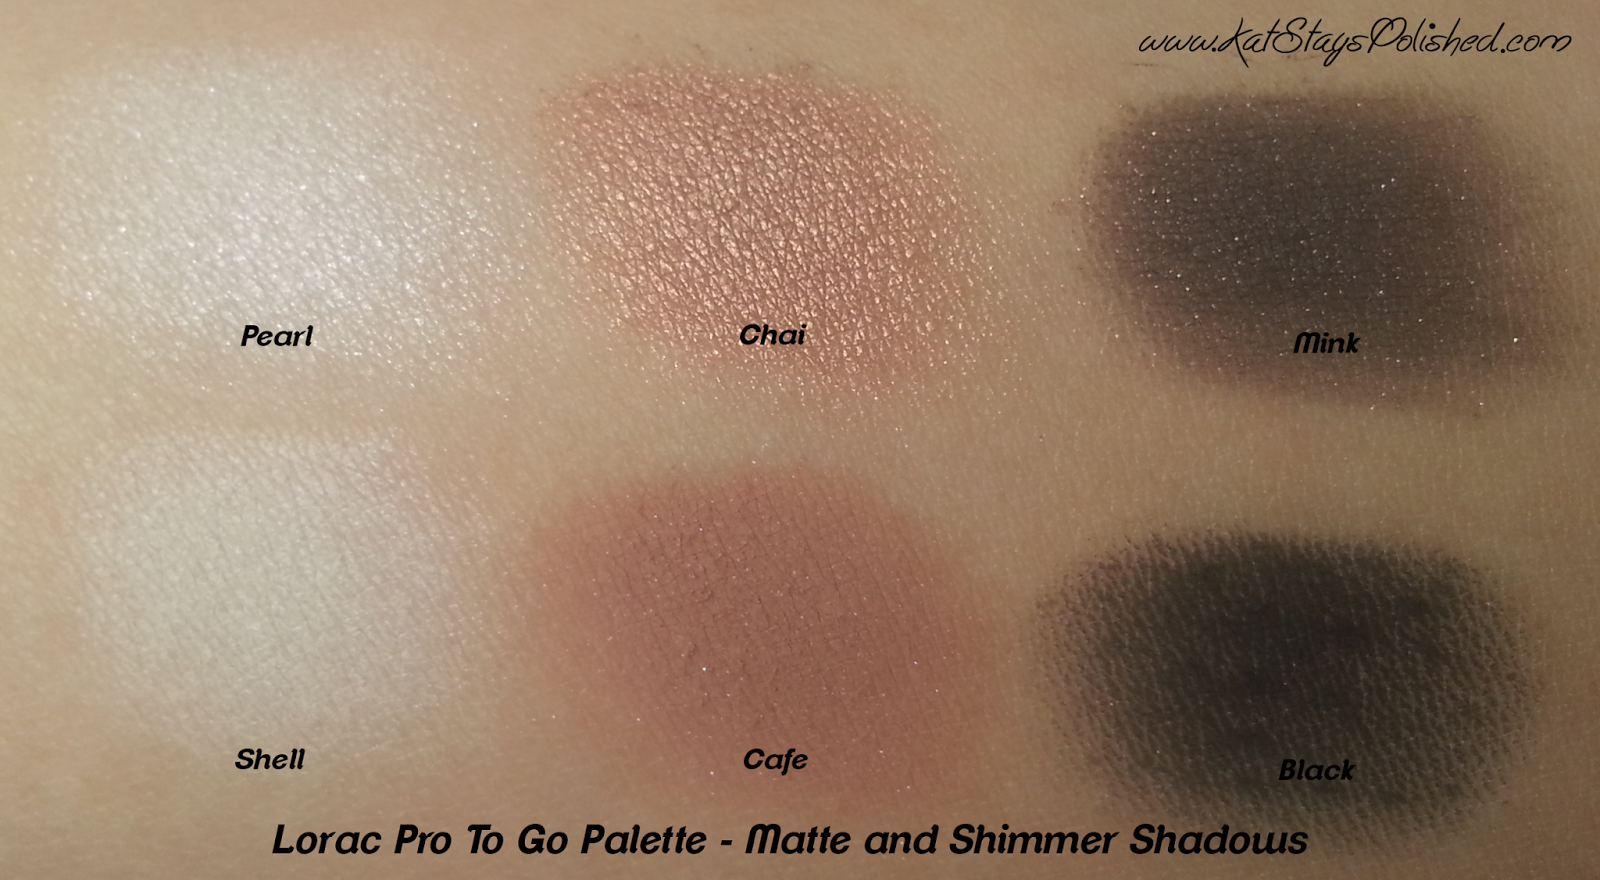 Lorac Pro To Go Palette - Matte and Shimmer Shadow Swatches